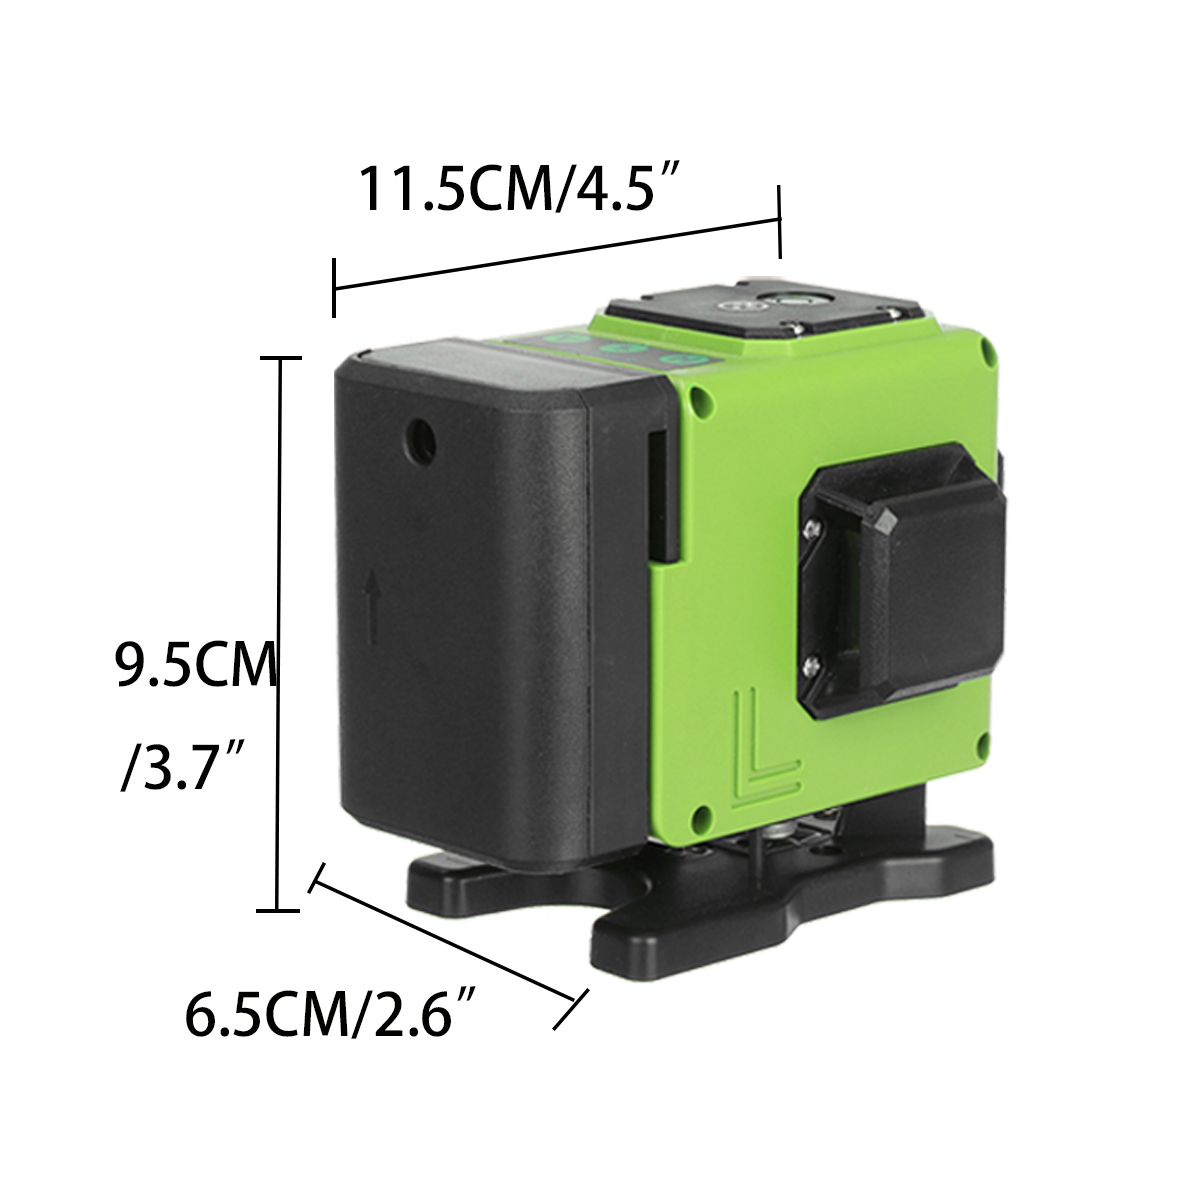 12-Line-Mini-Laser-Level-Green-Light-Wall-and-Floor-Dual-Purpose-Automatic-Wire-Bonding-Infrared-Lev-1903599-12